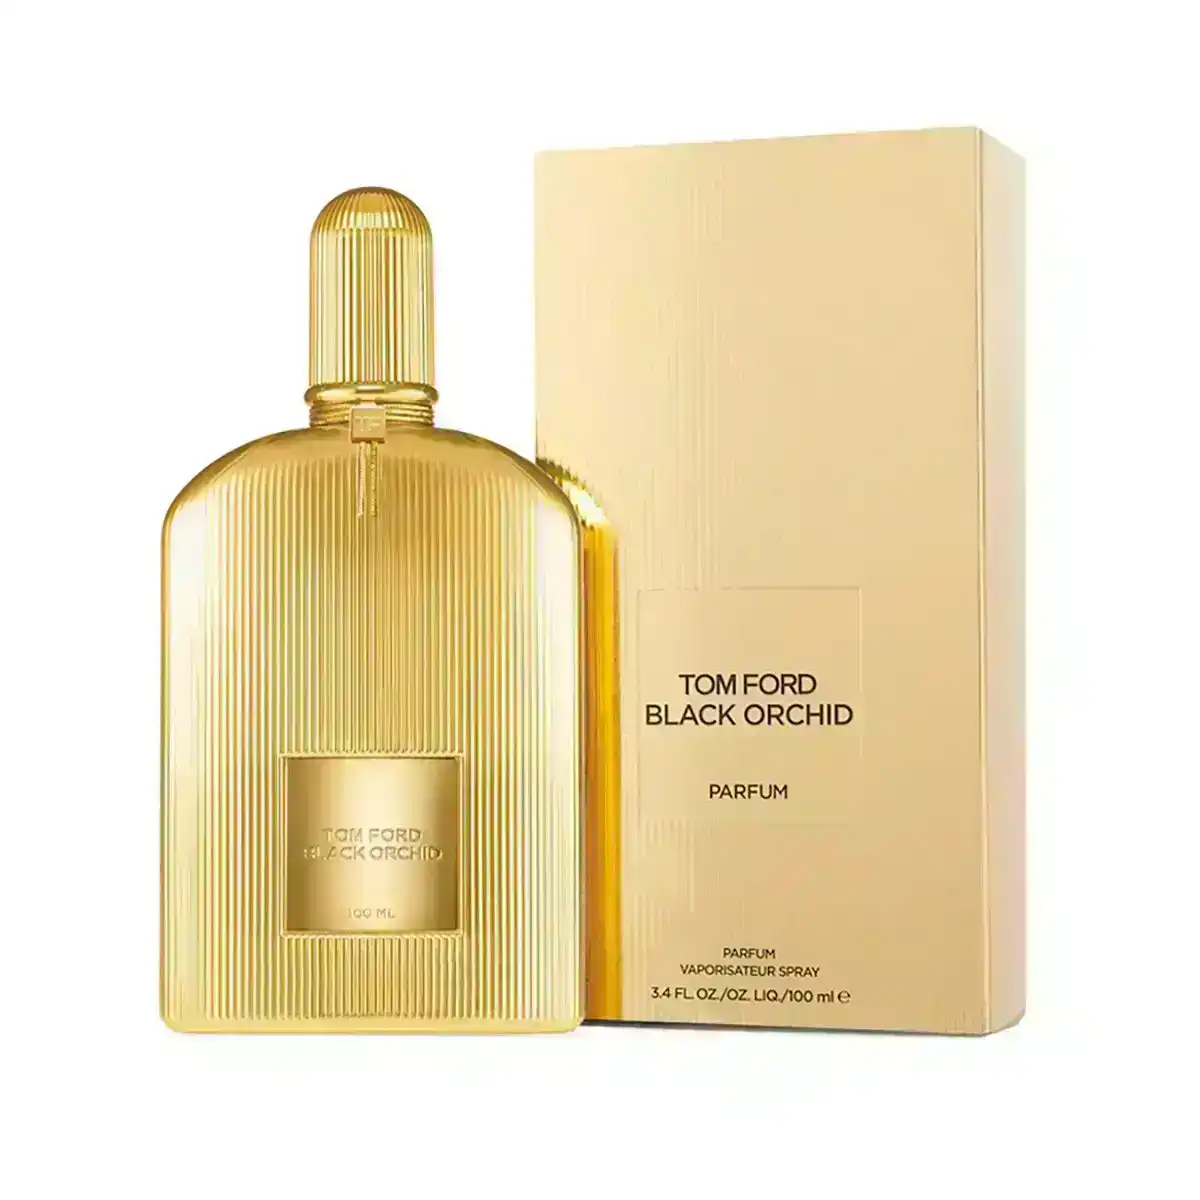 Black Orchid Parfum 100ml by Tom Ford (Unisex)